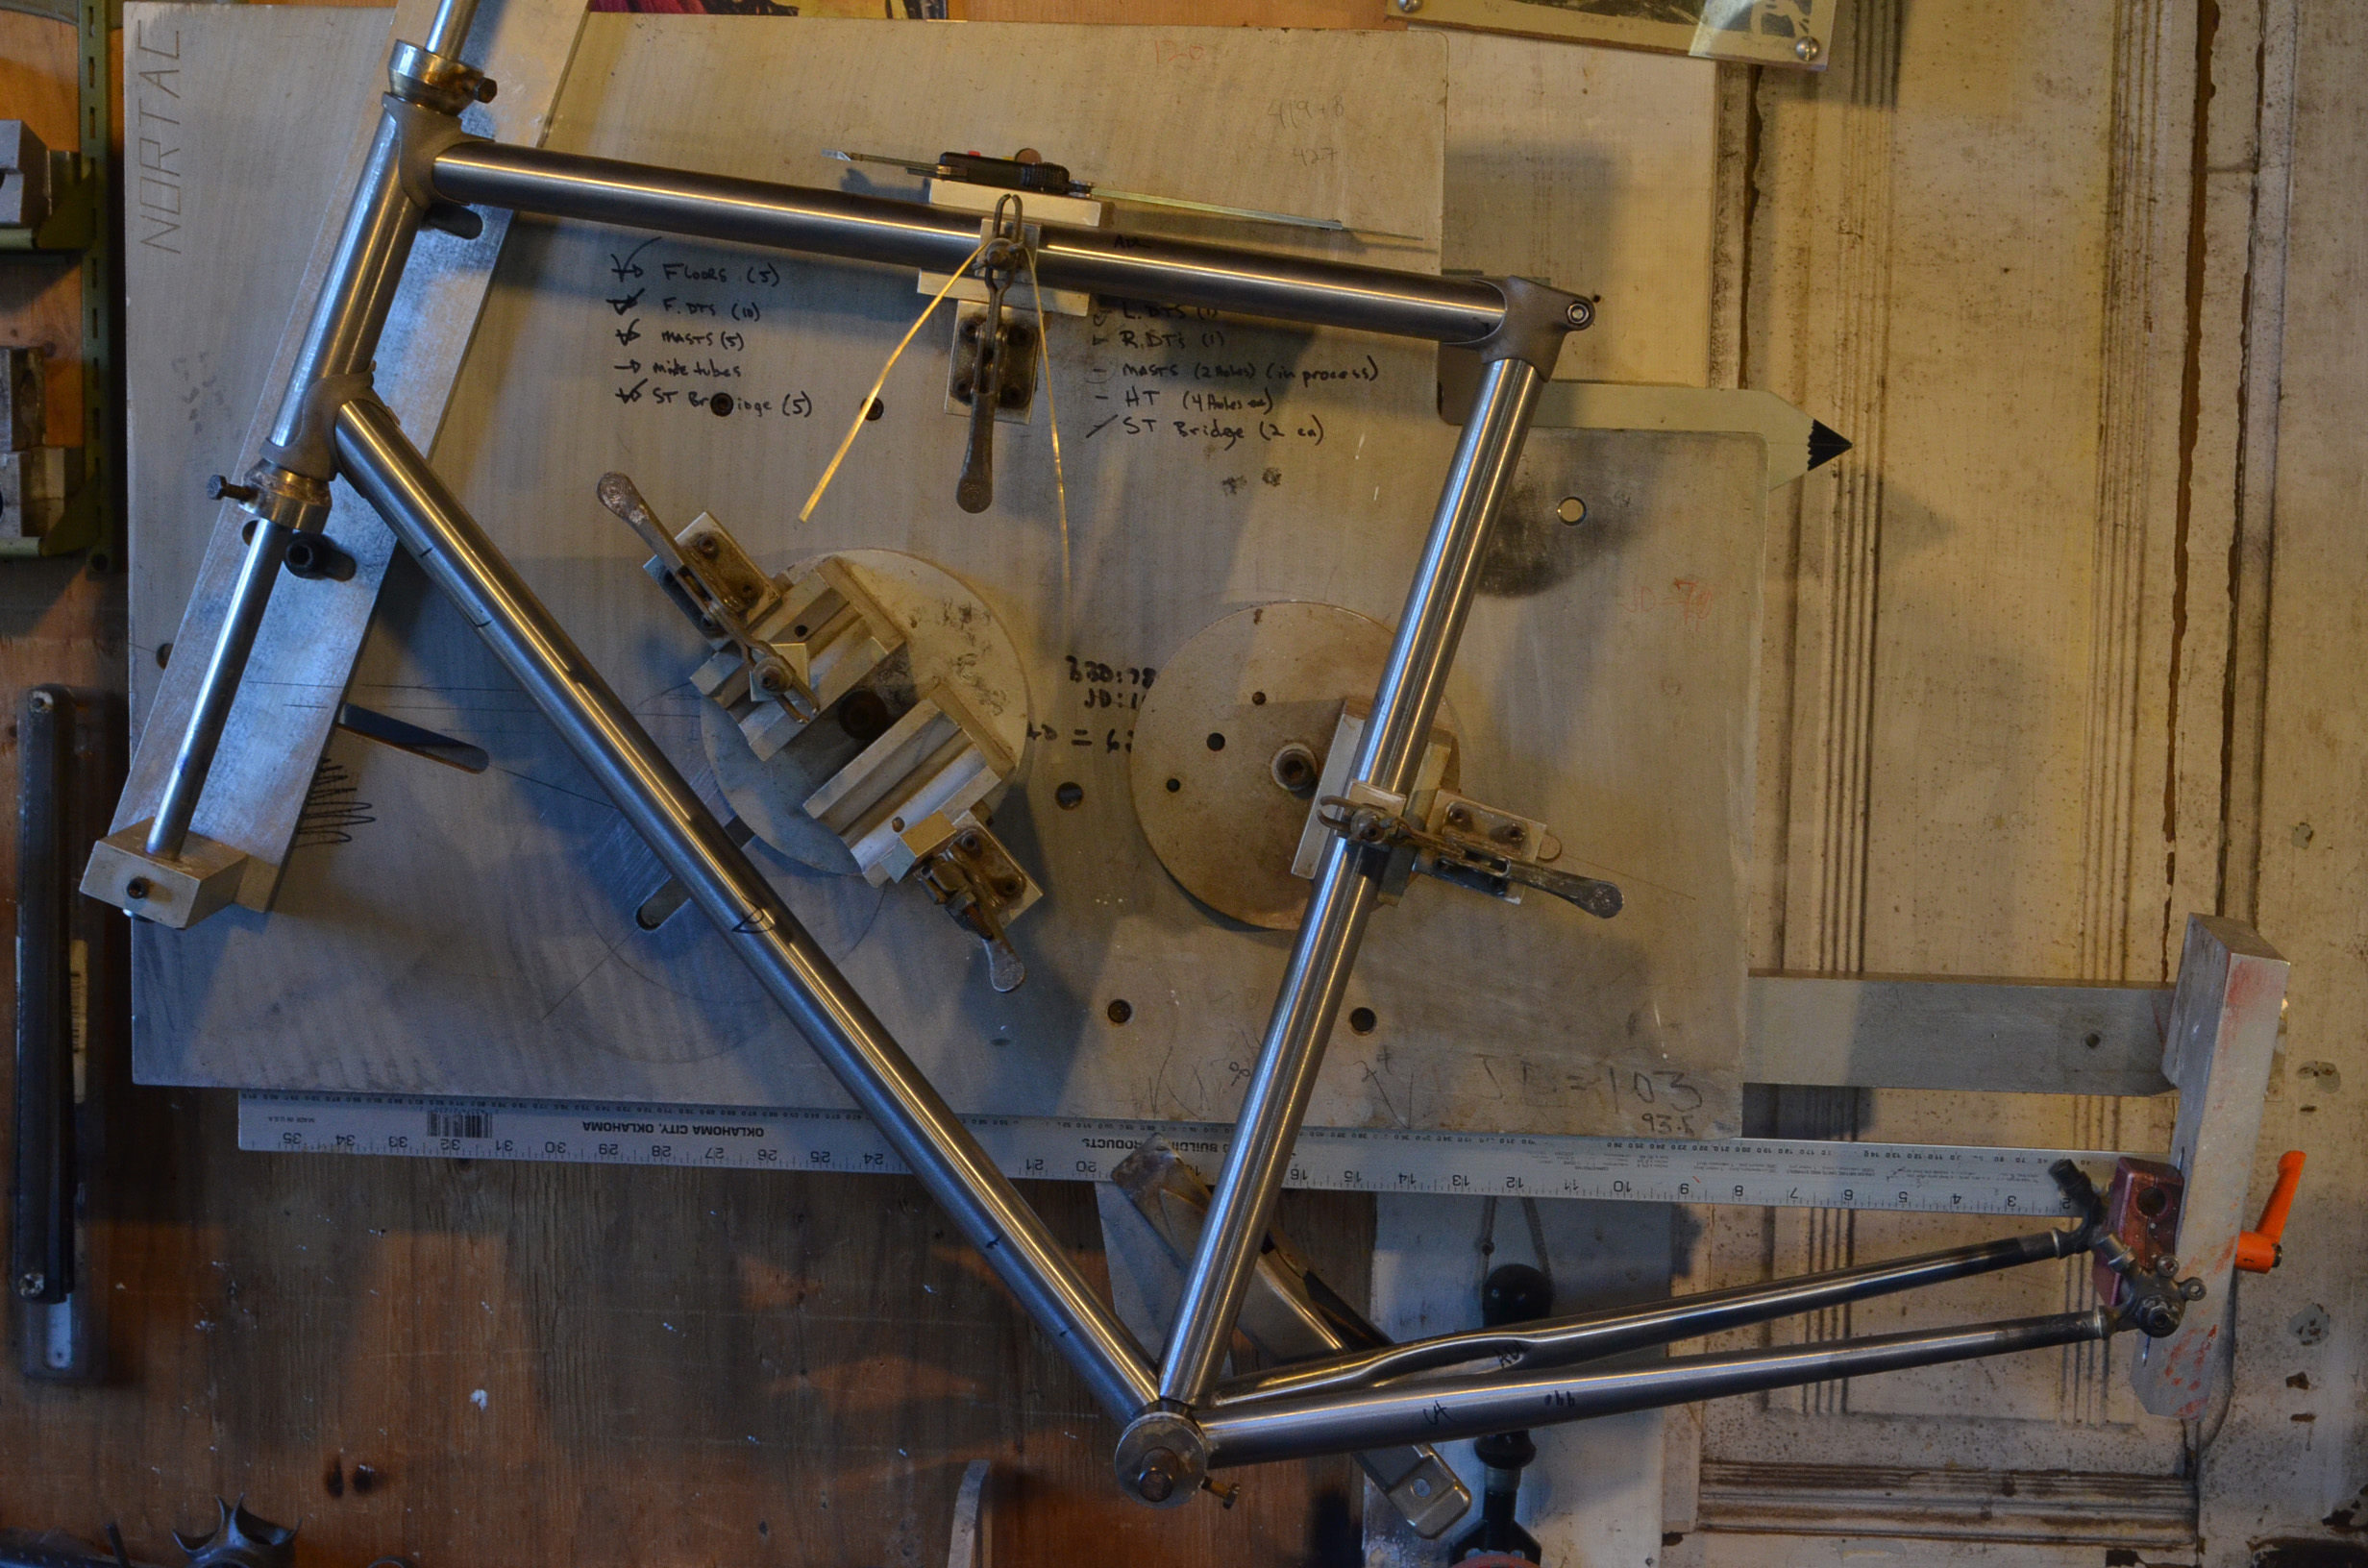 Lugged frame in the Nortac Jig